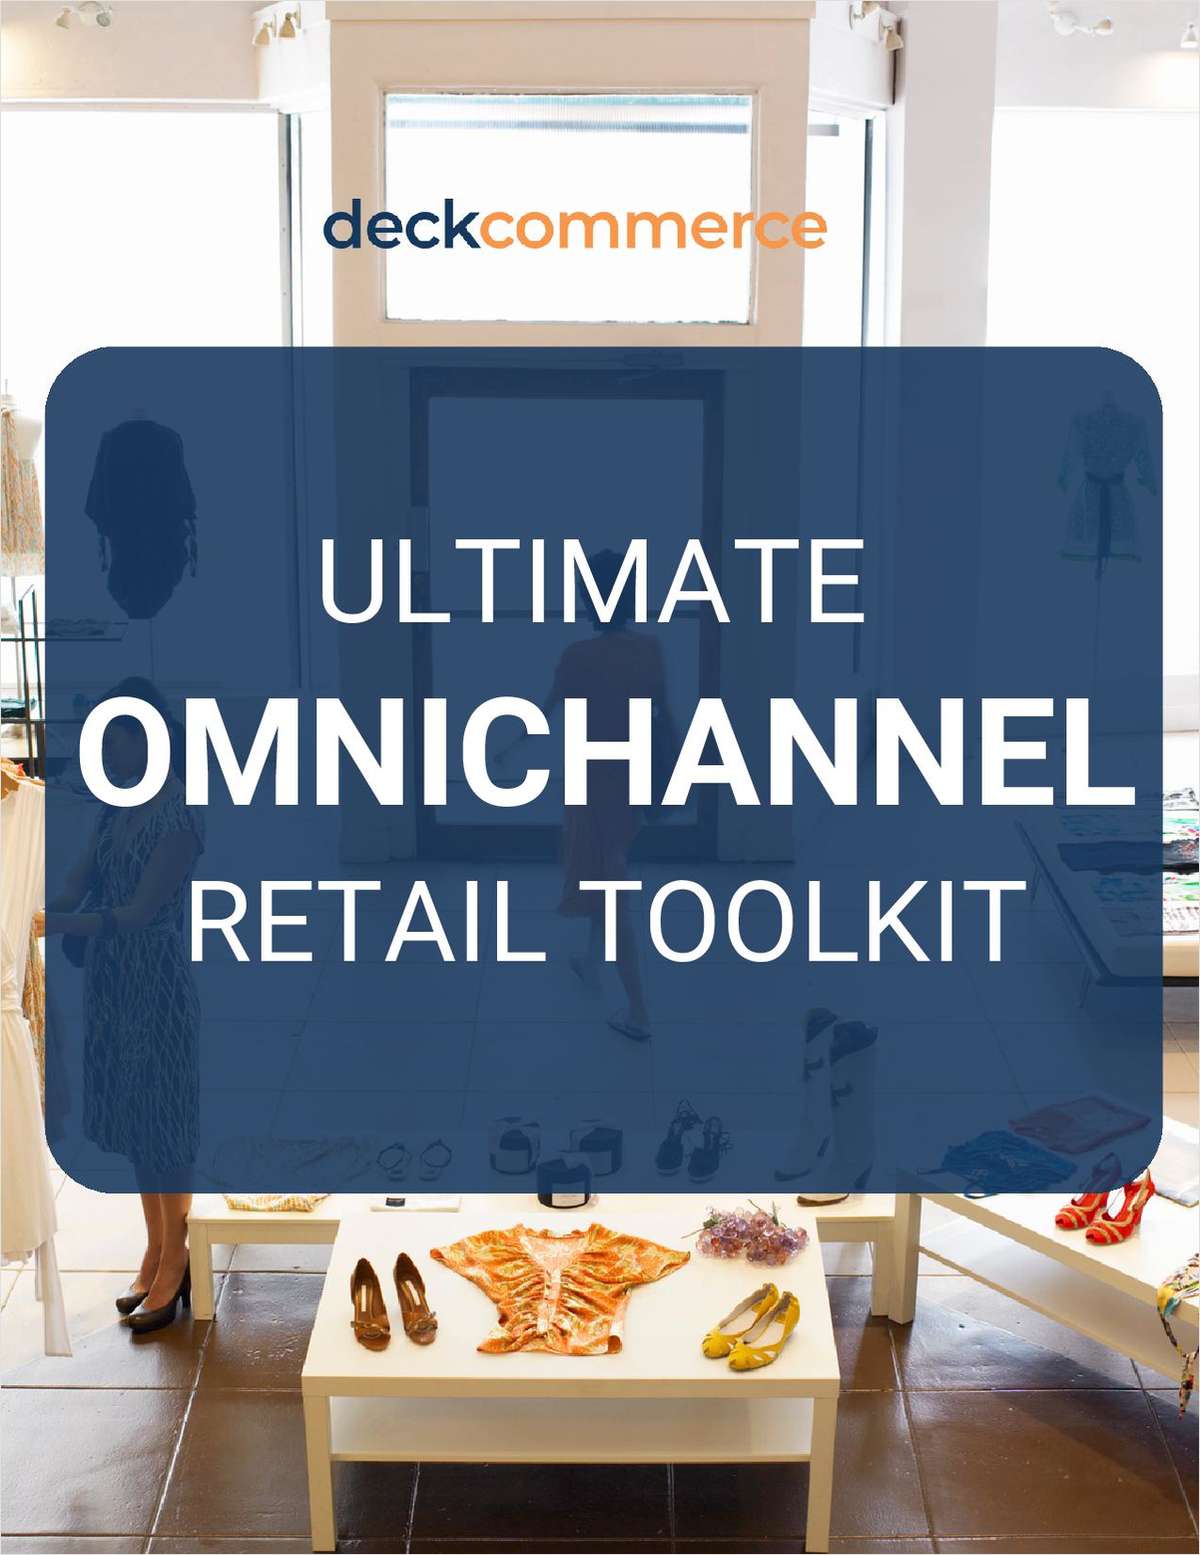 The Ultimate Omnichannel Retail Toolkit